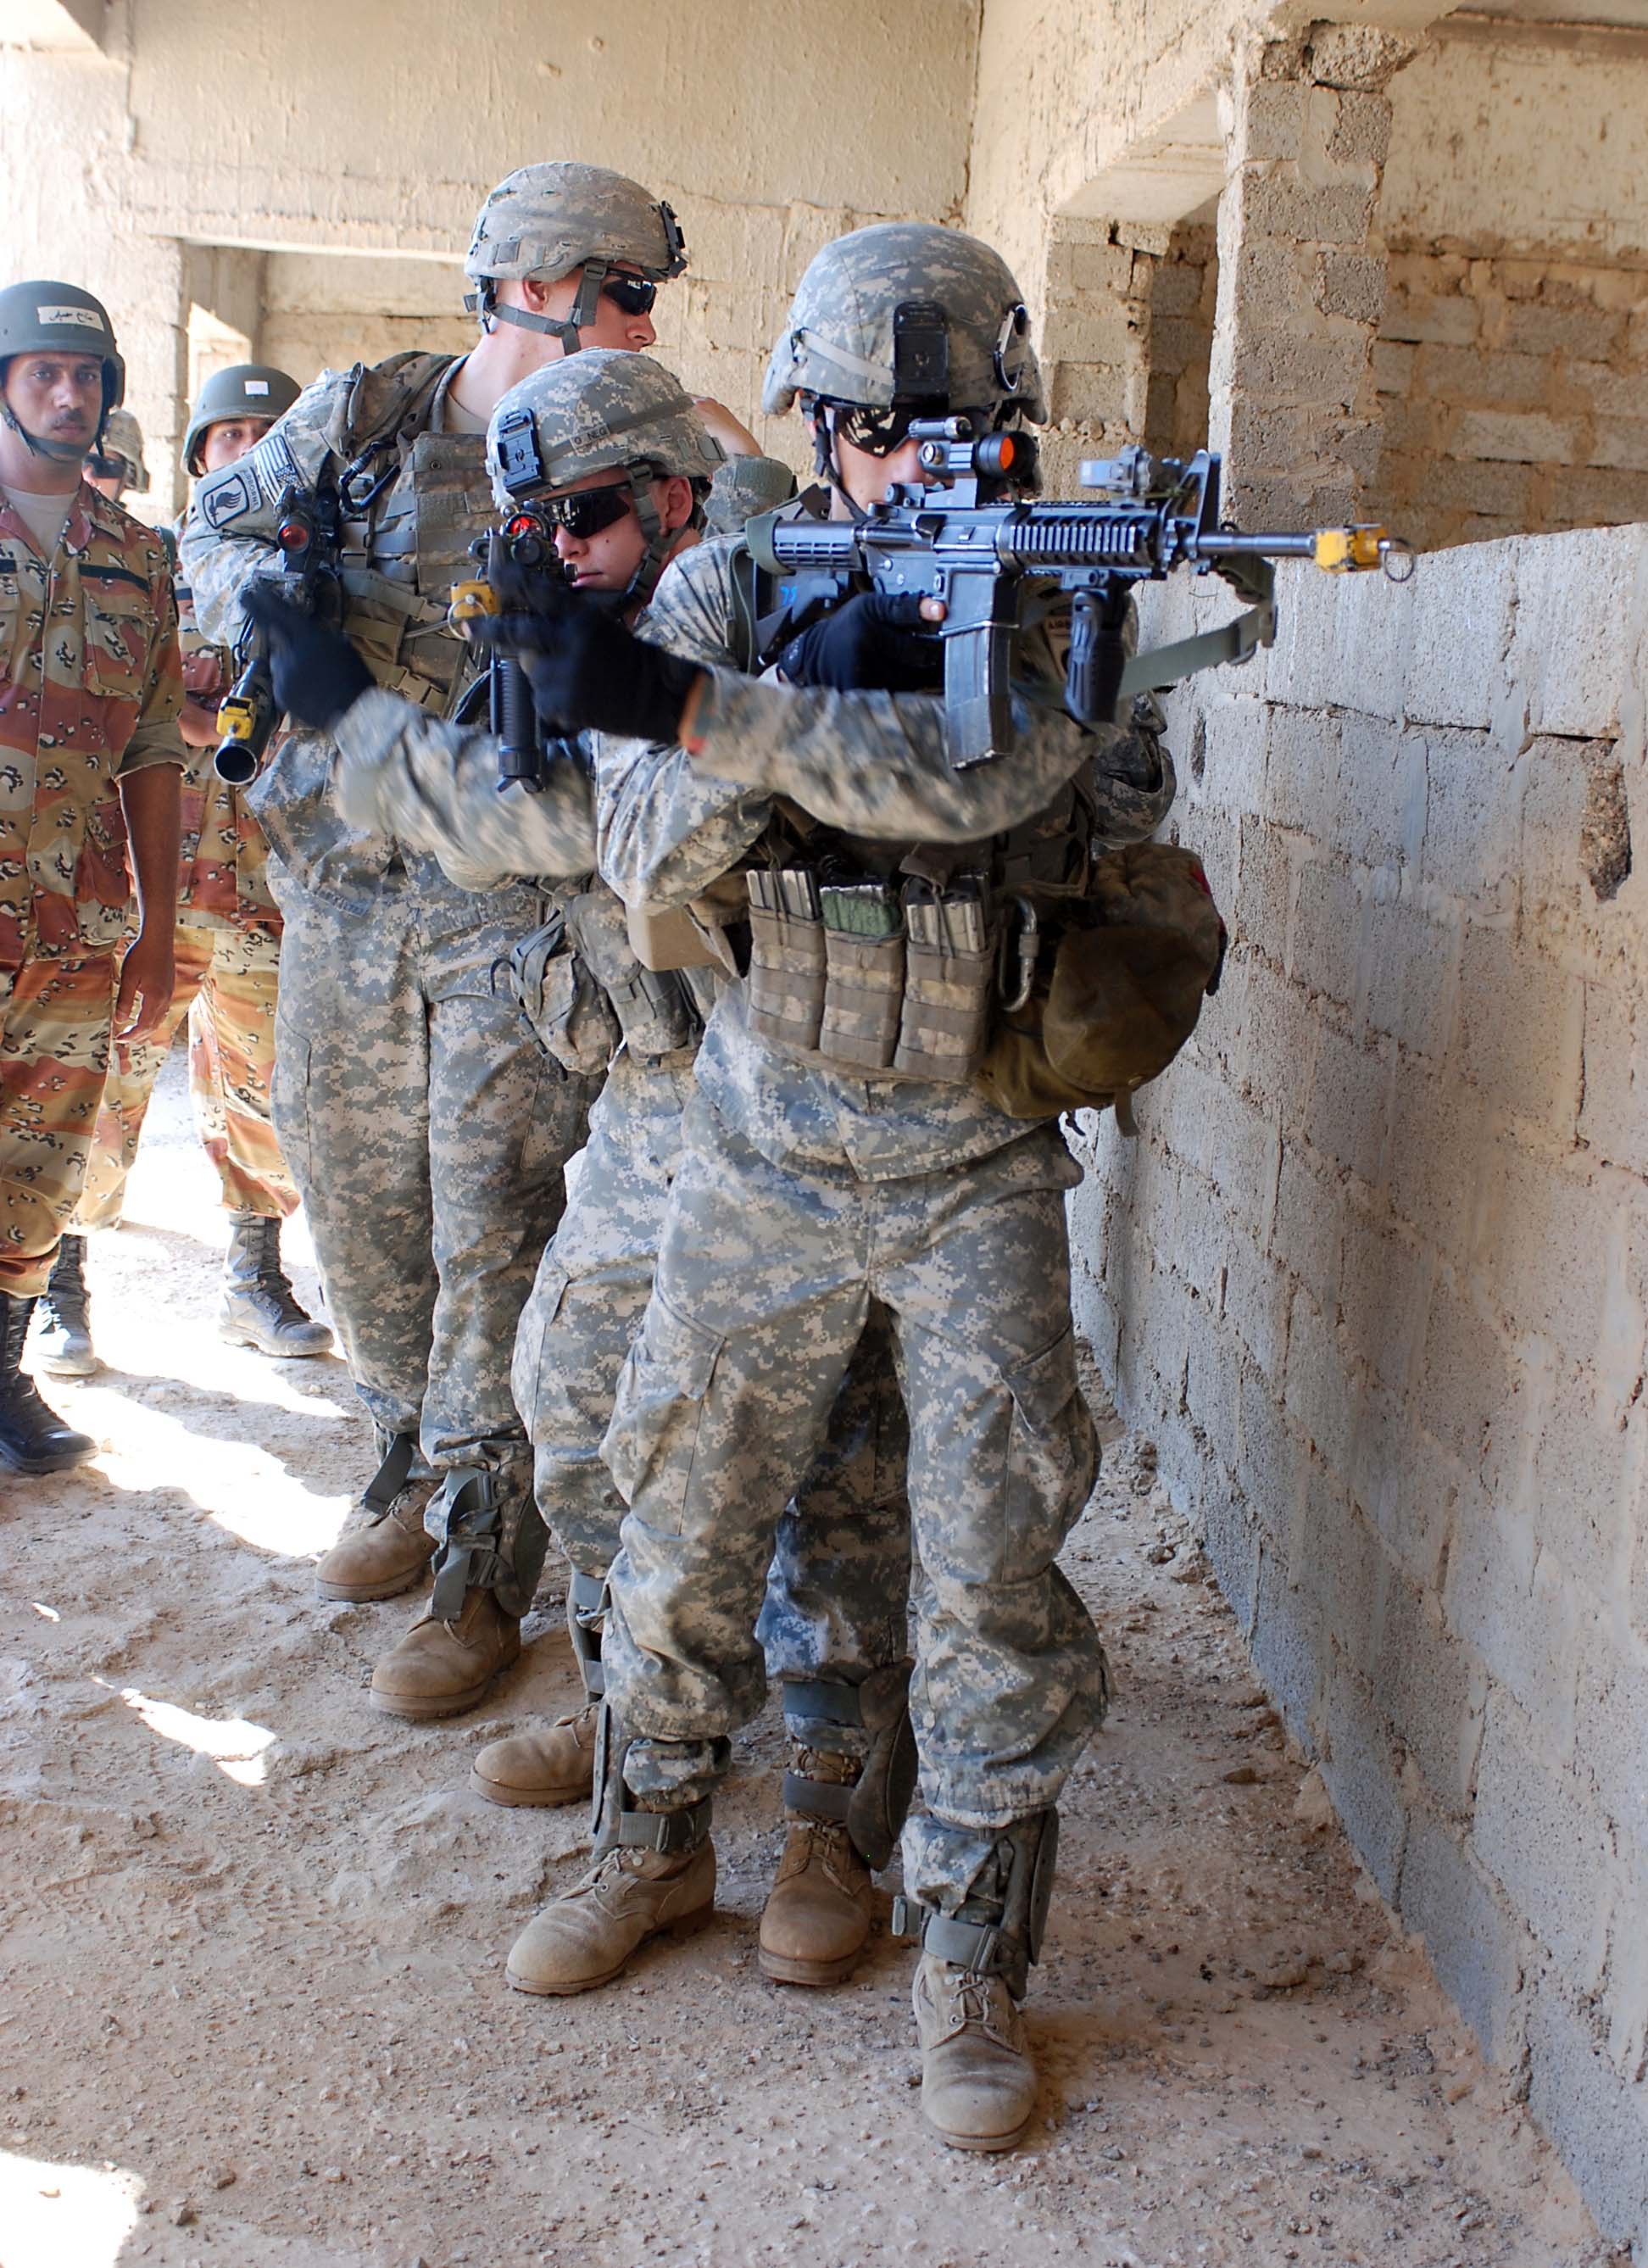 82nd Airborne Division helps train troops coalition forces in